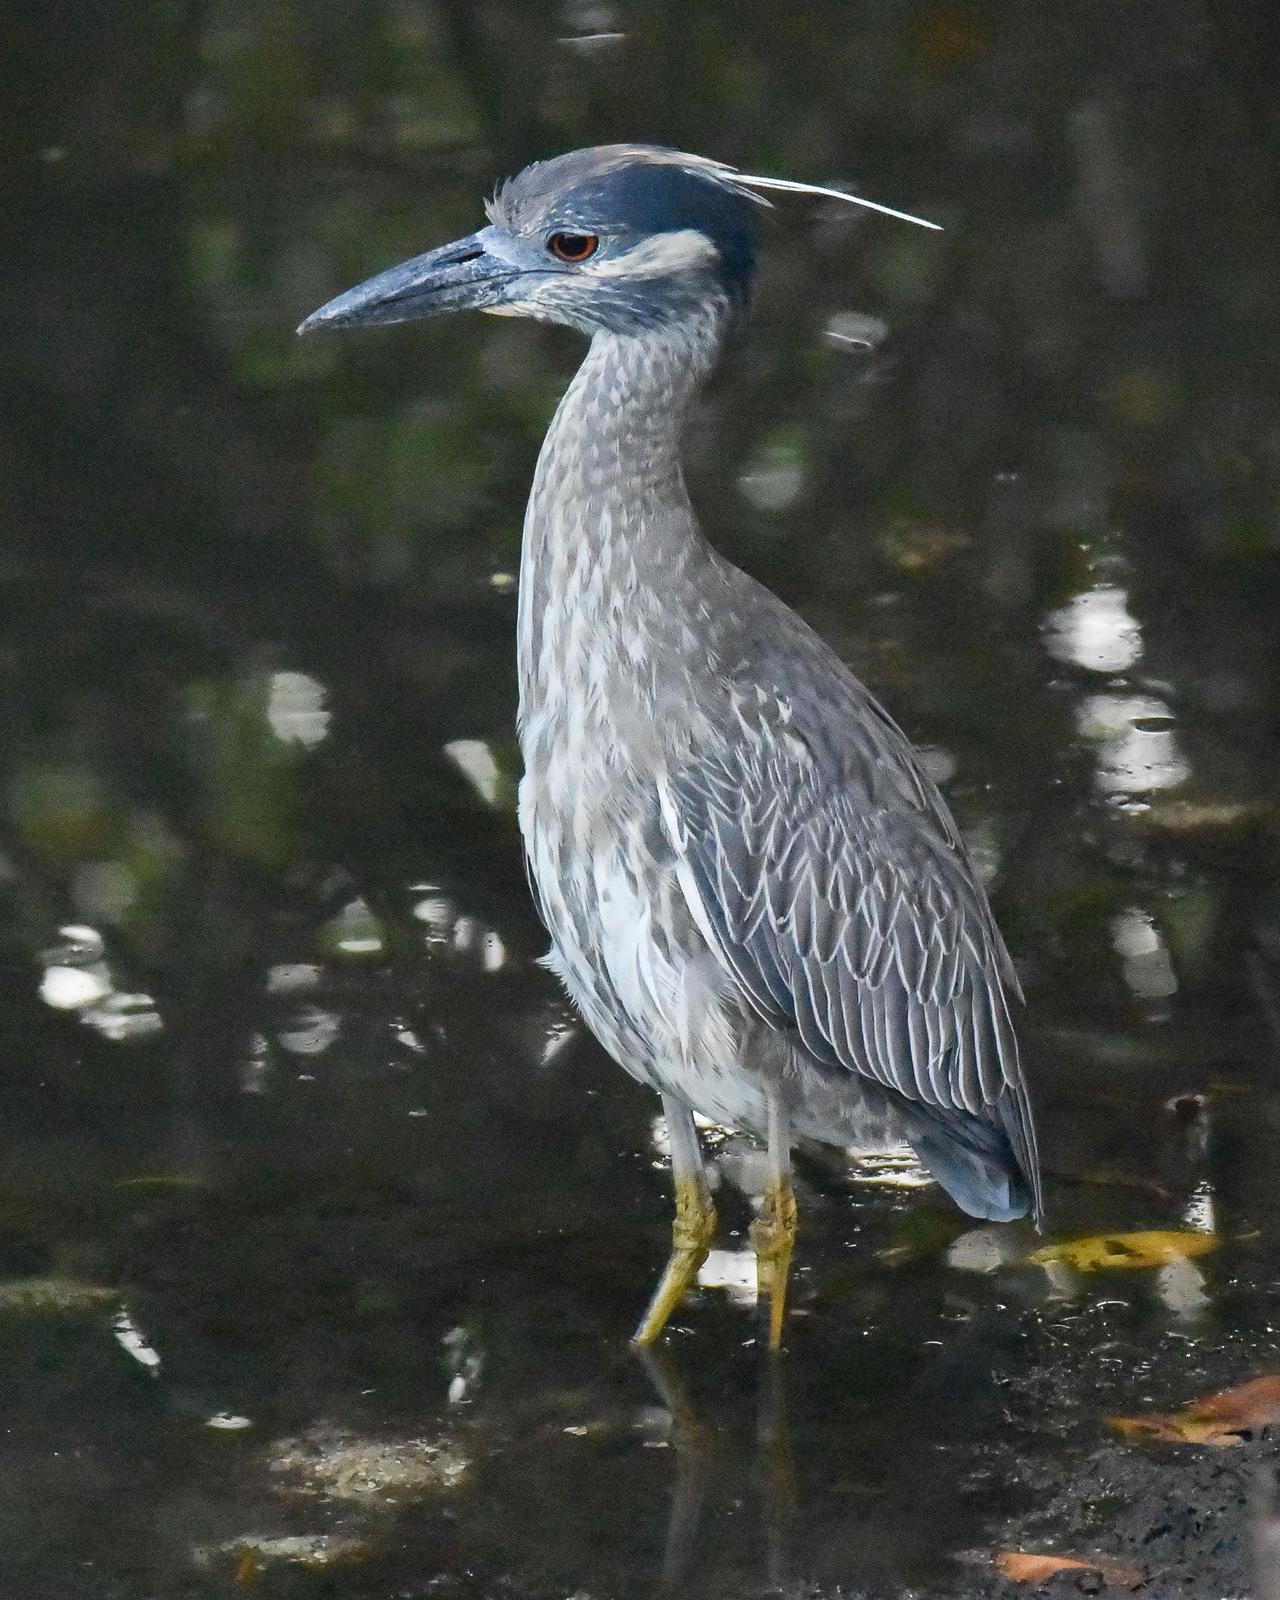 Yellow-crowned Night-Heron Photo by Emily Percival